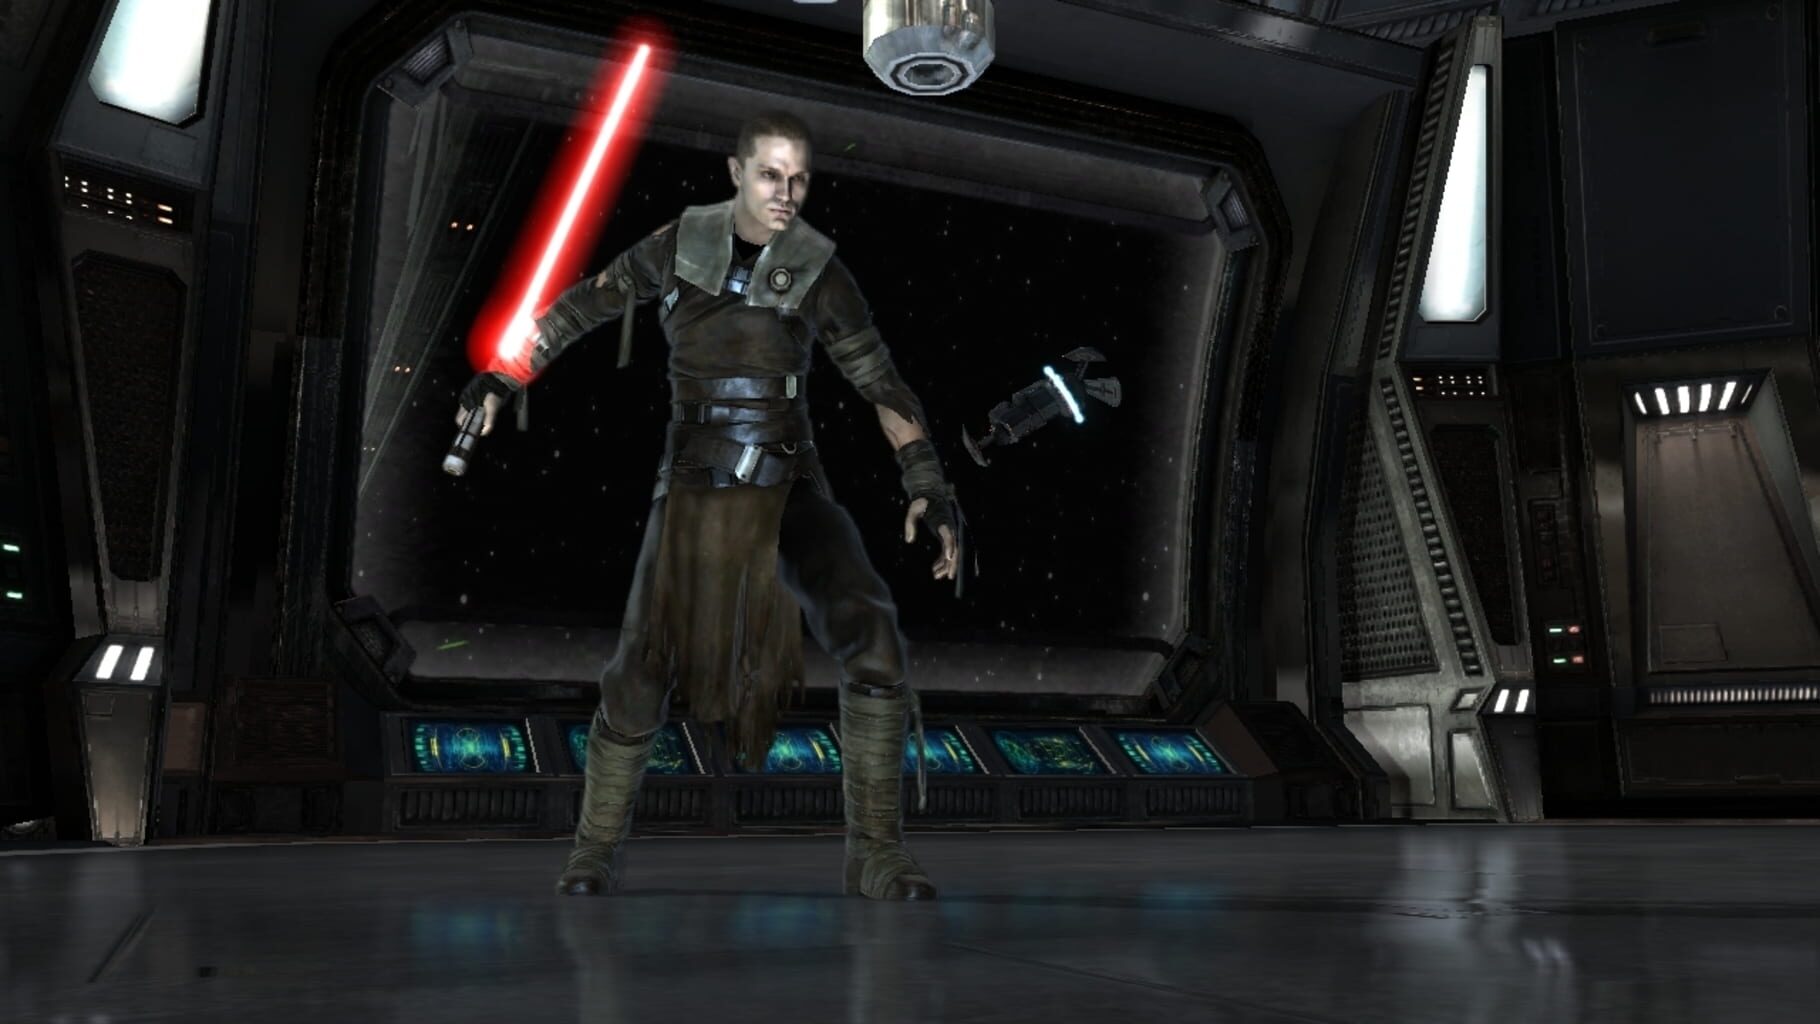 Captura de pantalla - Star Wars: The Force Unleashed - Ultimate Sith Edition